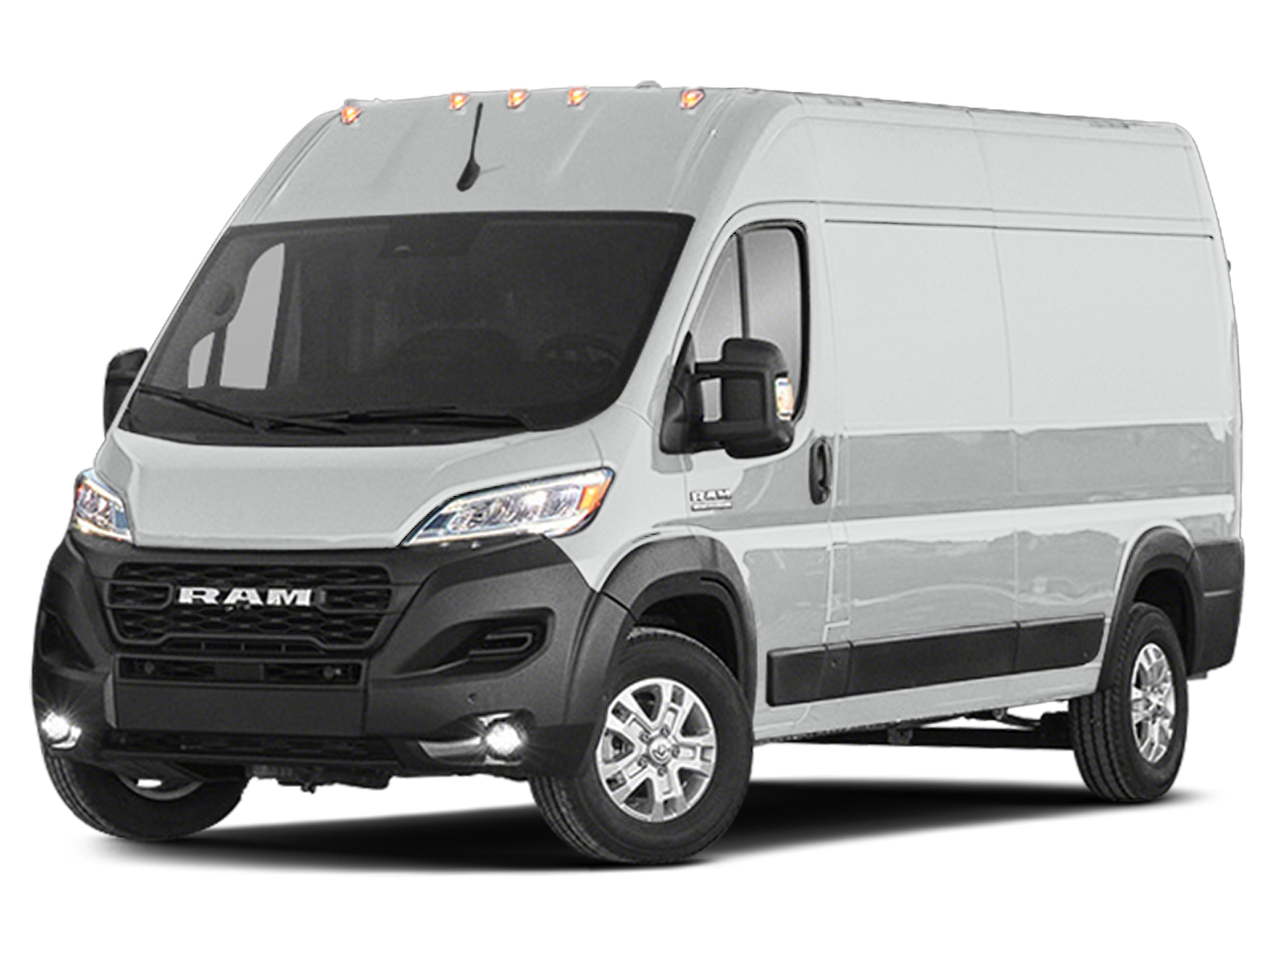 2023 RAM ProMaster Cargo Van HIGH ROOF 136' WB in Bright White Clearcoat for Sale - Glendale, CA | Glendale Dodge Chrysler